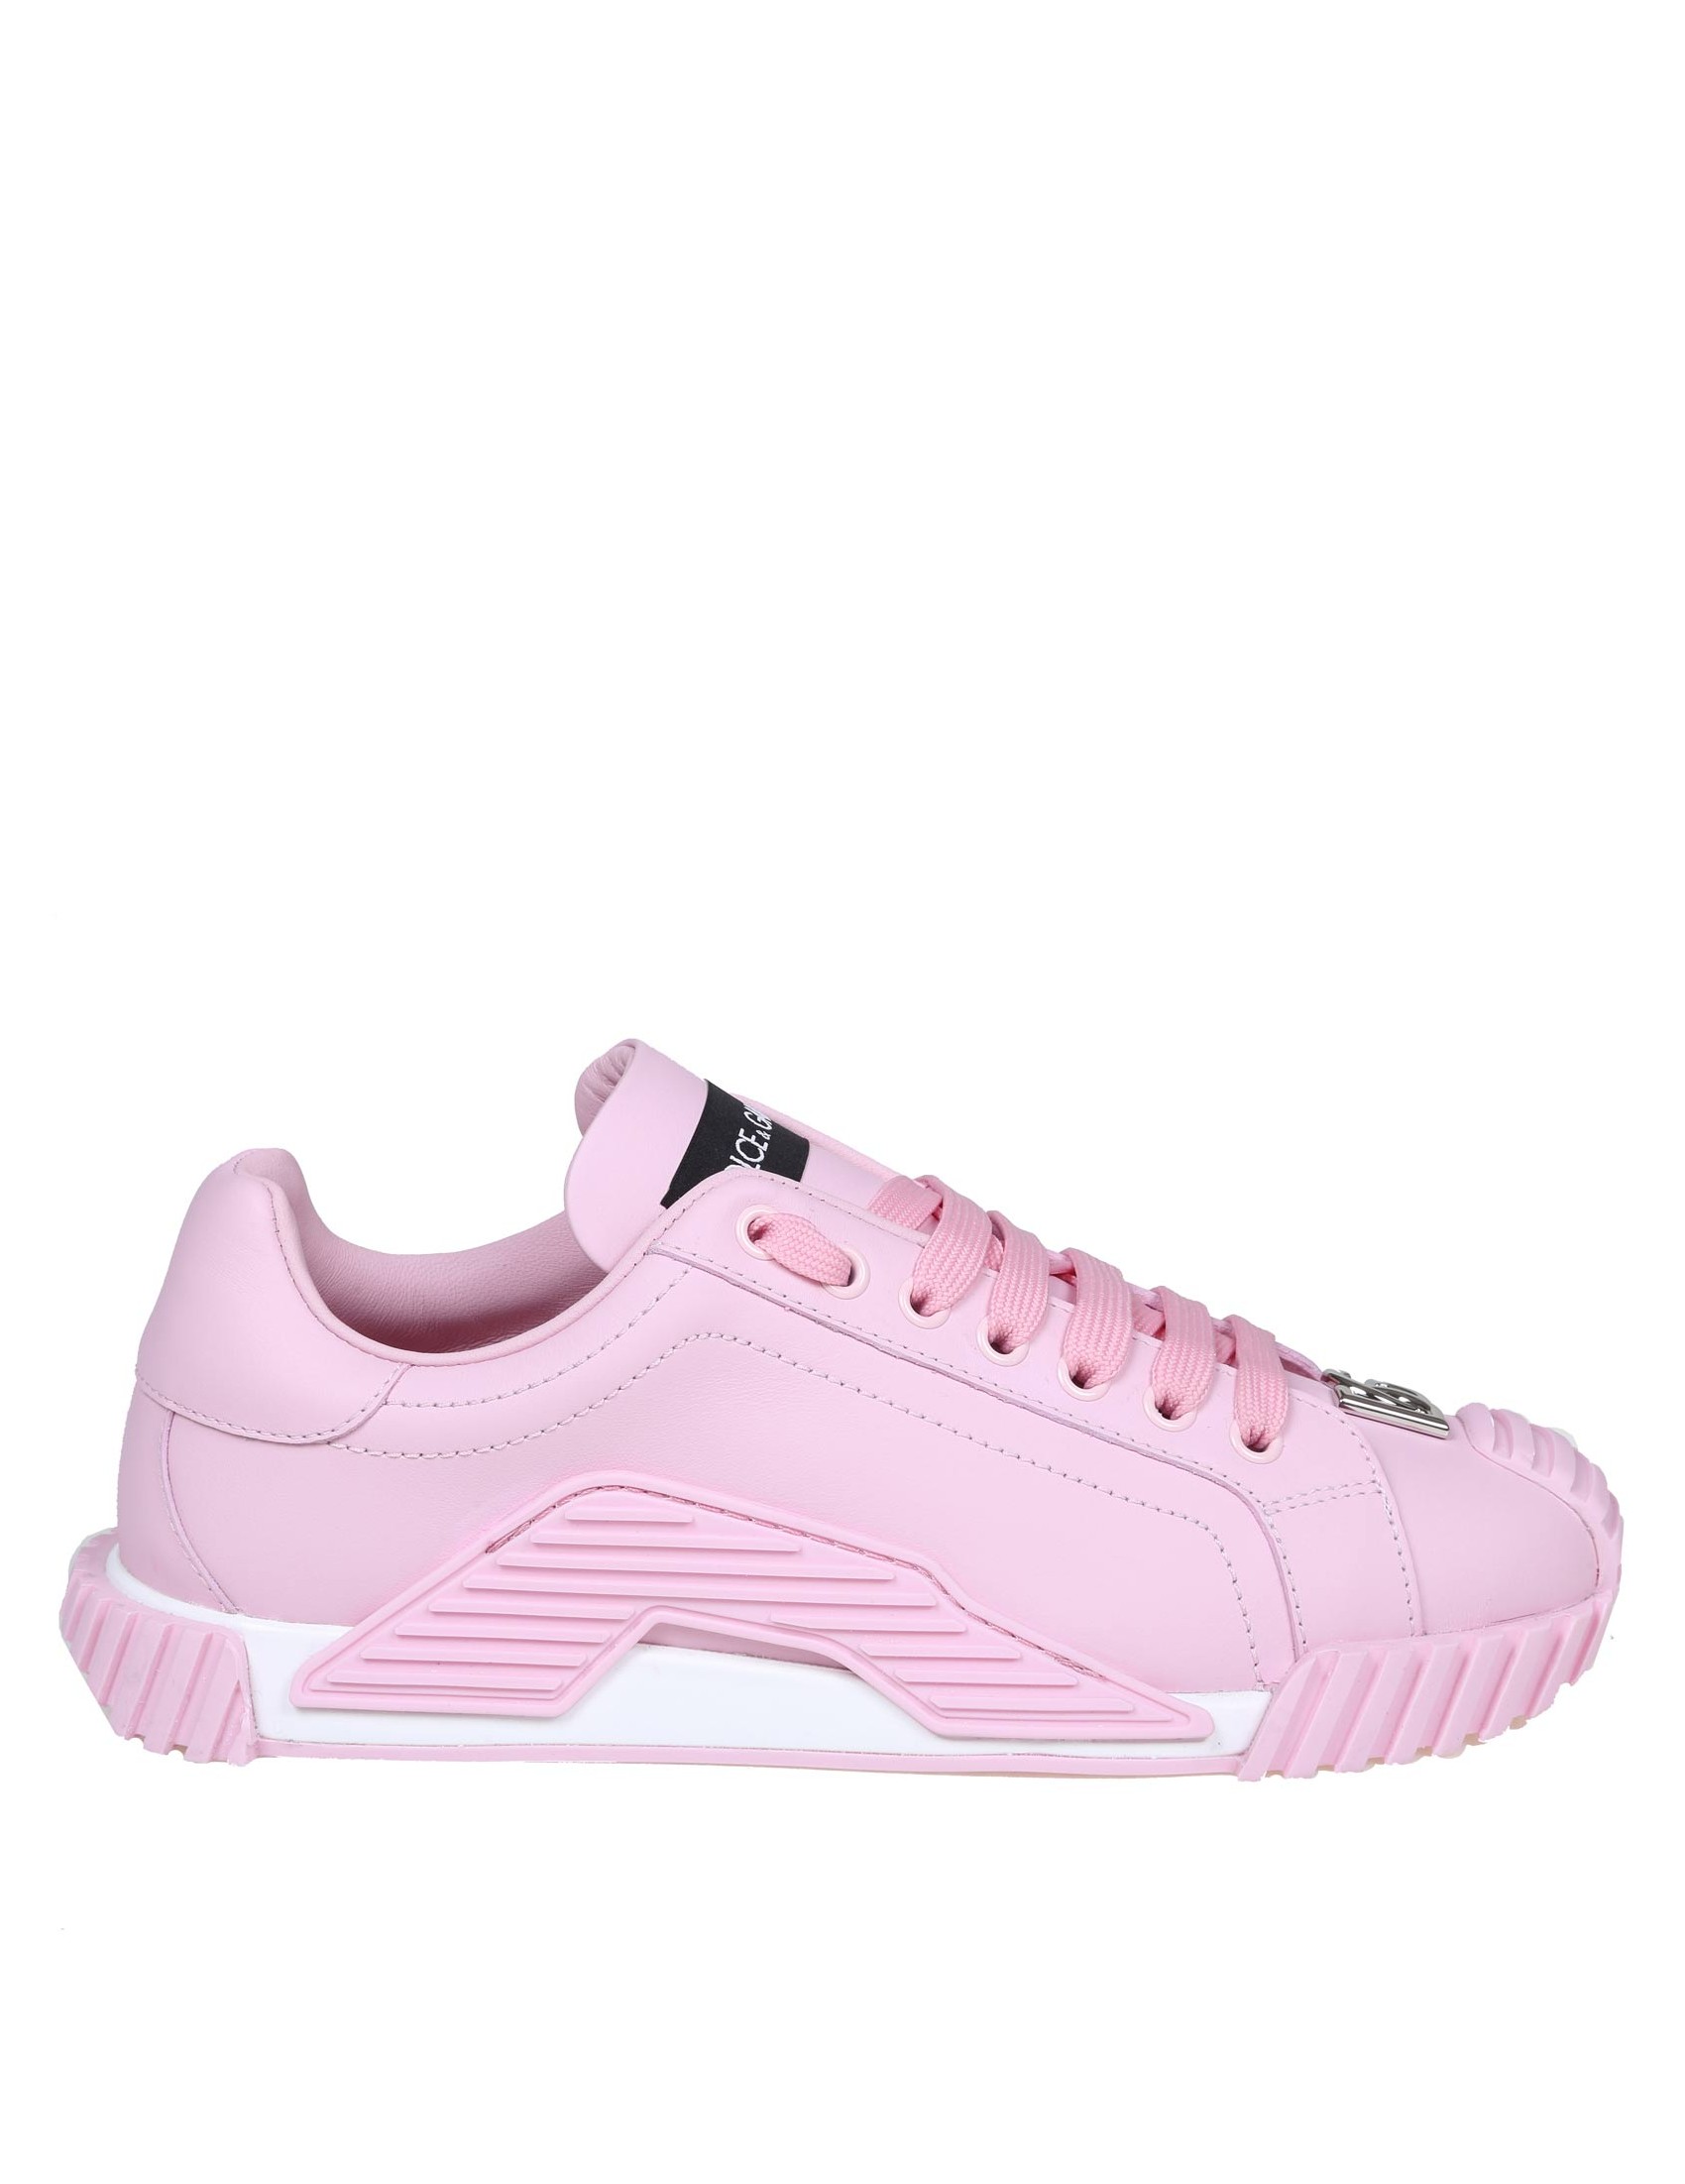 DOLCE & GABBANA SNEAKERS IN PINK COLOR LEATHER